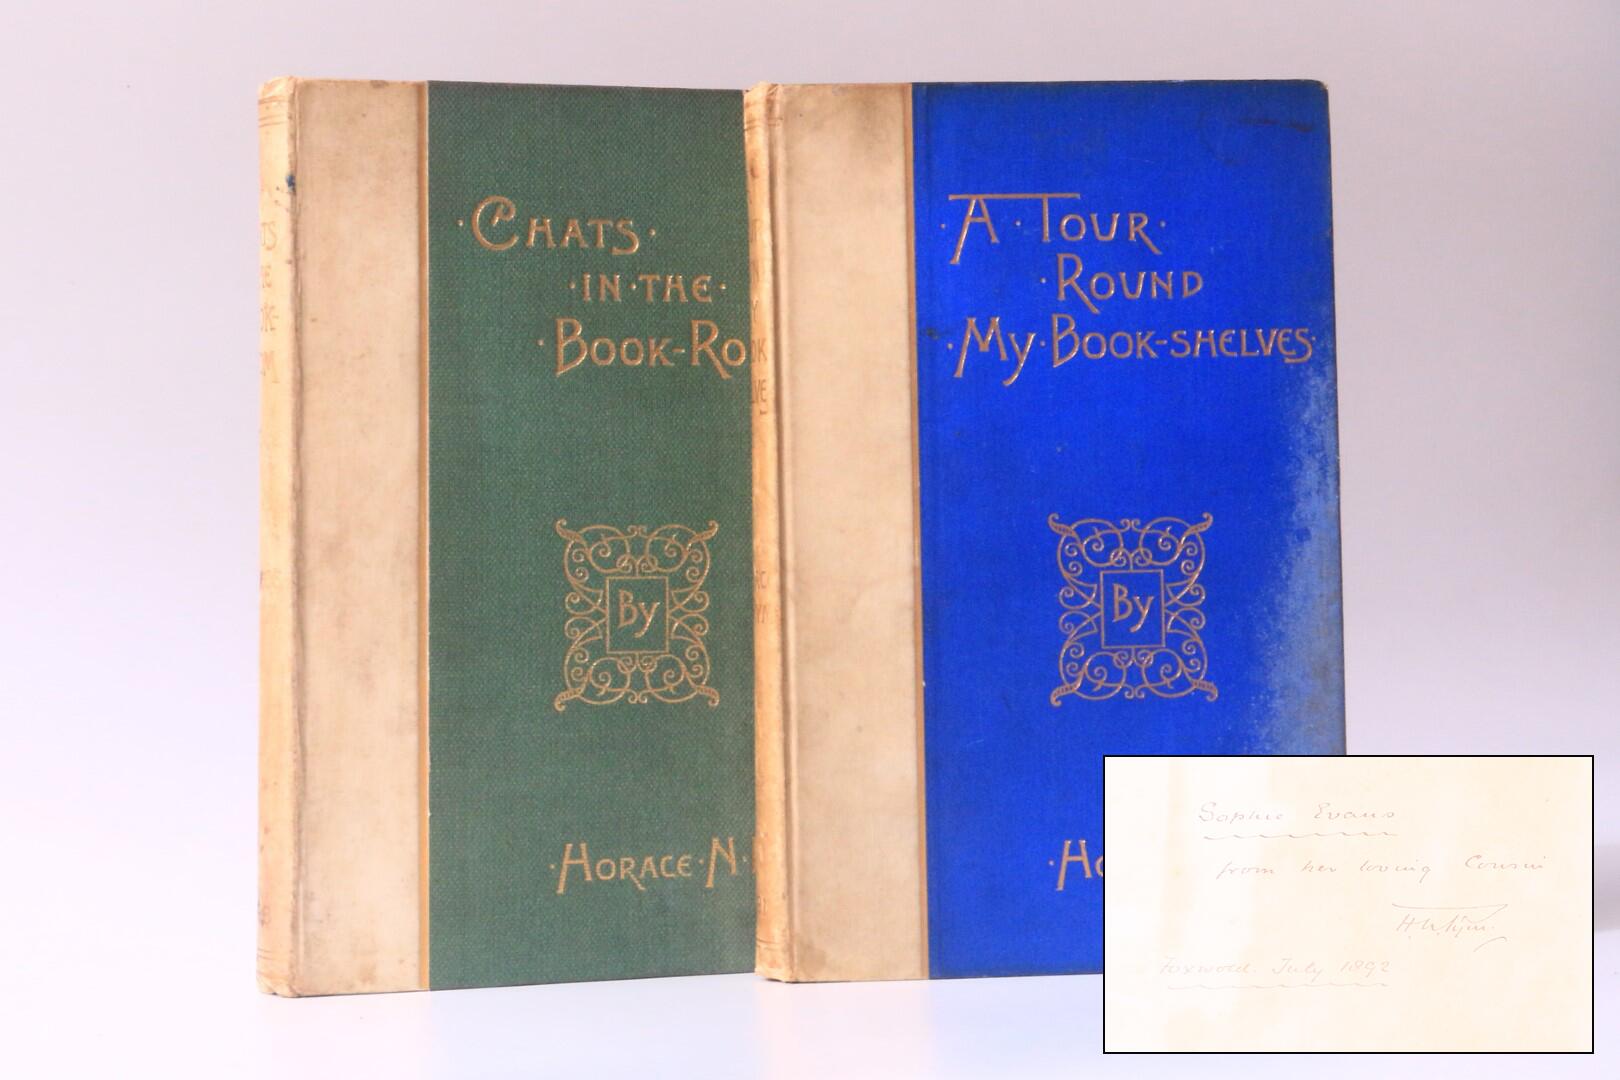 Horace N. Pym - A Tour Round My Book-Shelves w/ Chats in the Book-Room - Privately Printed, 1891-1895, Signed Limited Edition.